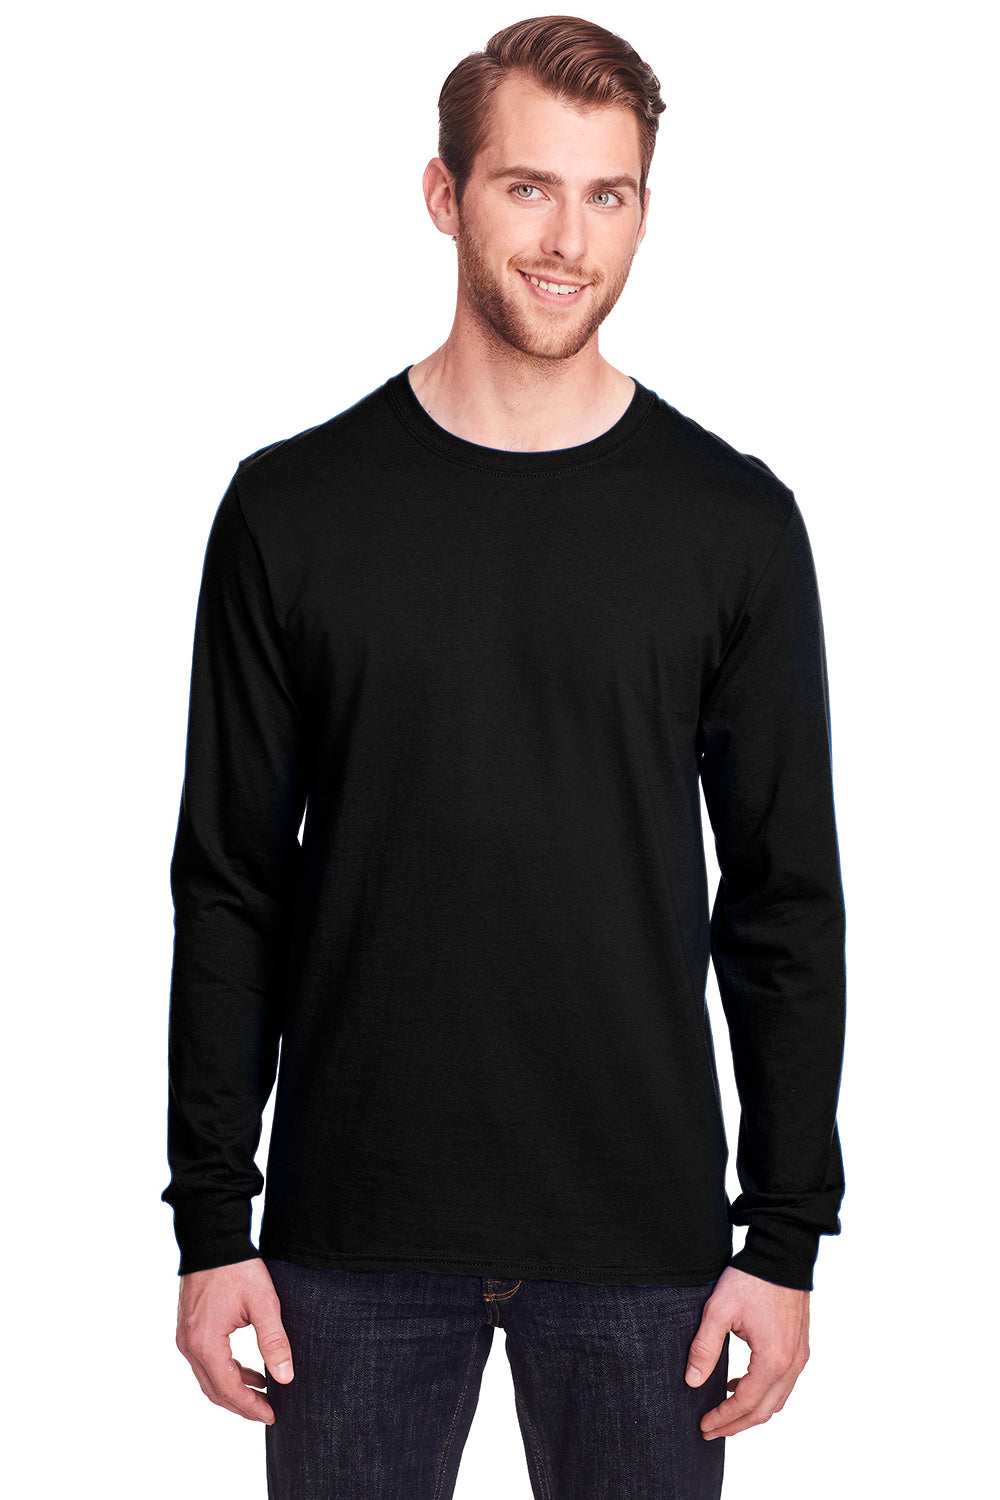 Fruit Of The Loom IC47LSR Mens Iconic Long Sleeve Crewneck T-Shirt Black Front